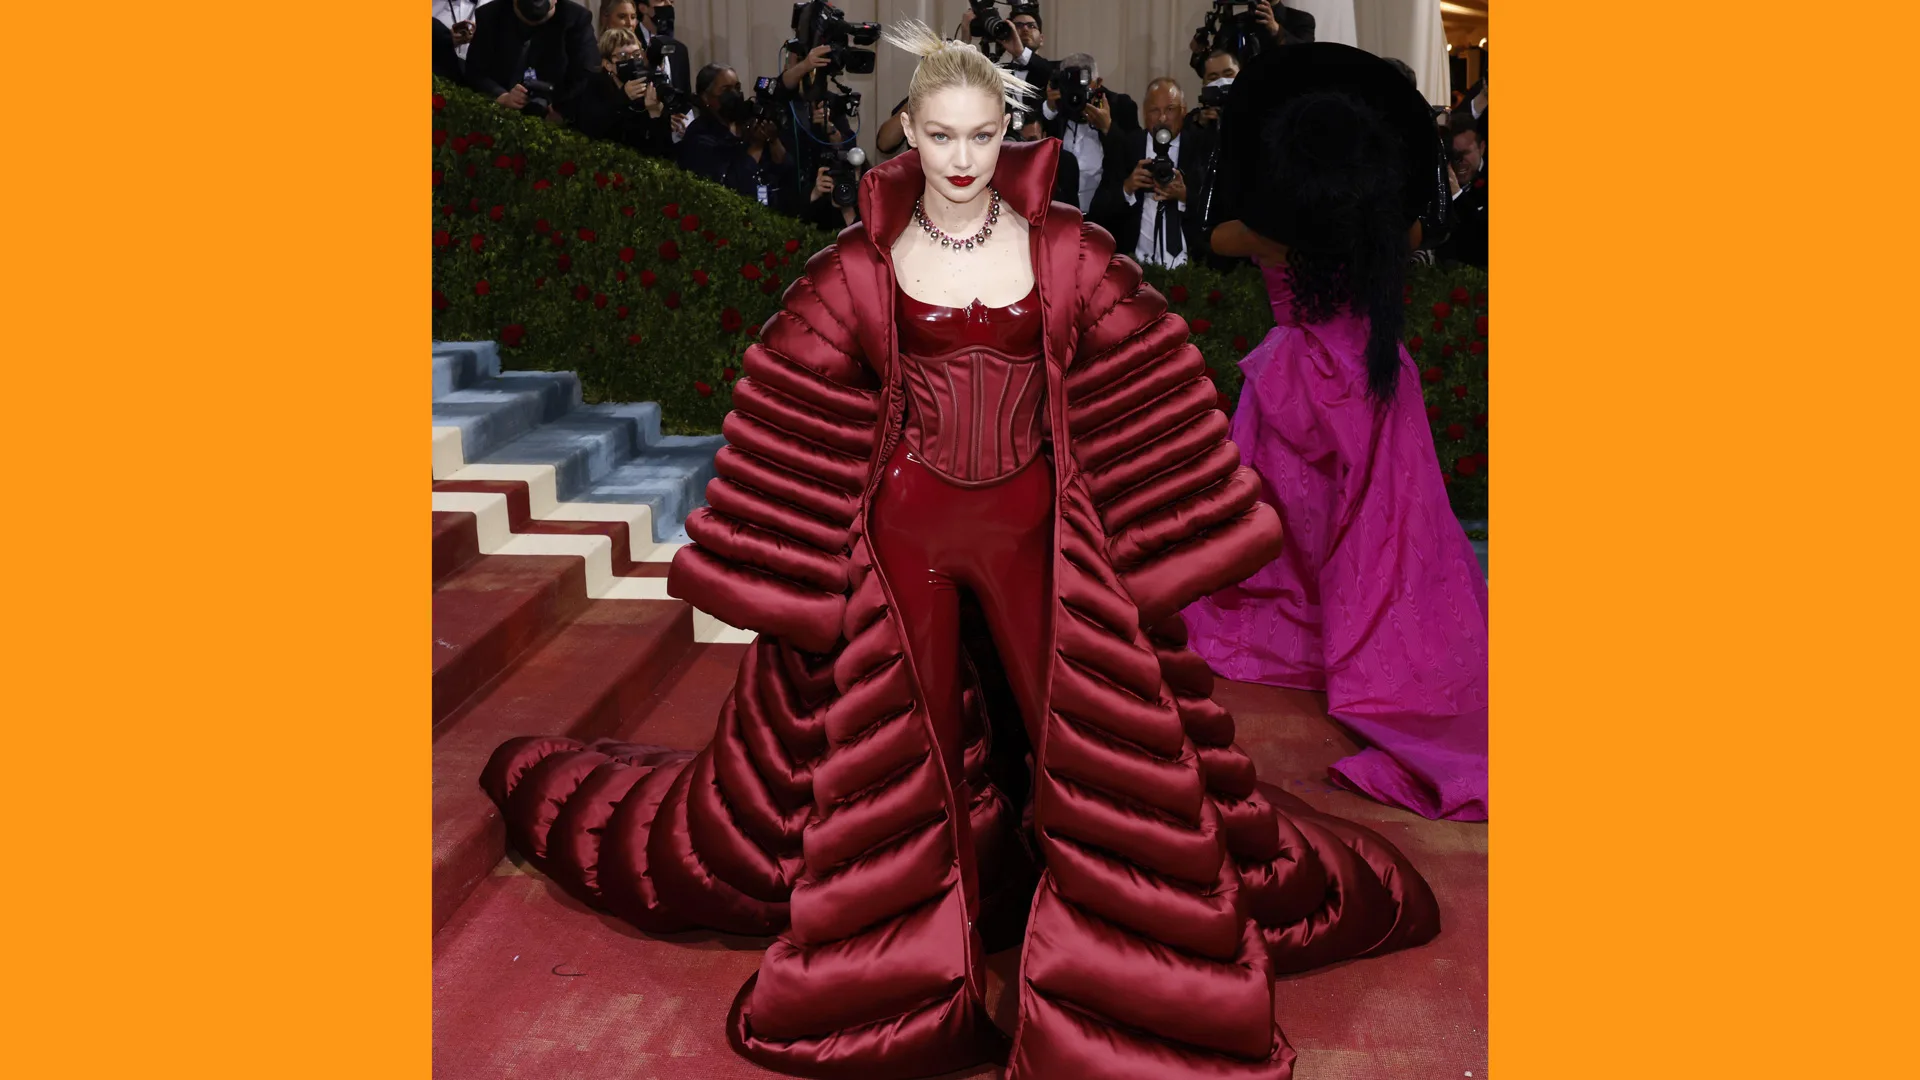 A photograph of Gigi Hadid on the red carpet at Met Gala in a red puffy dress with large sleeves bordered with orange